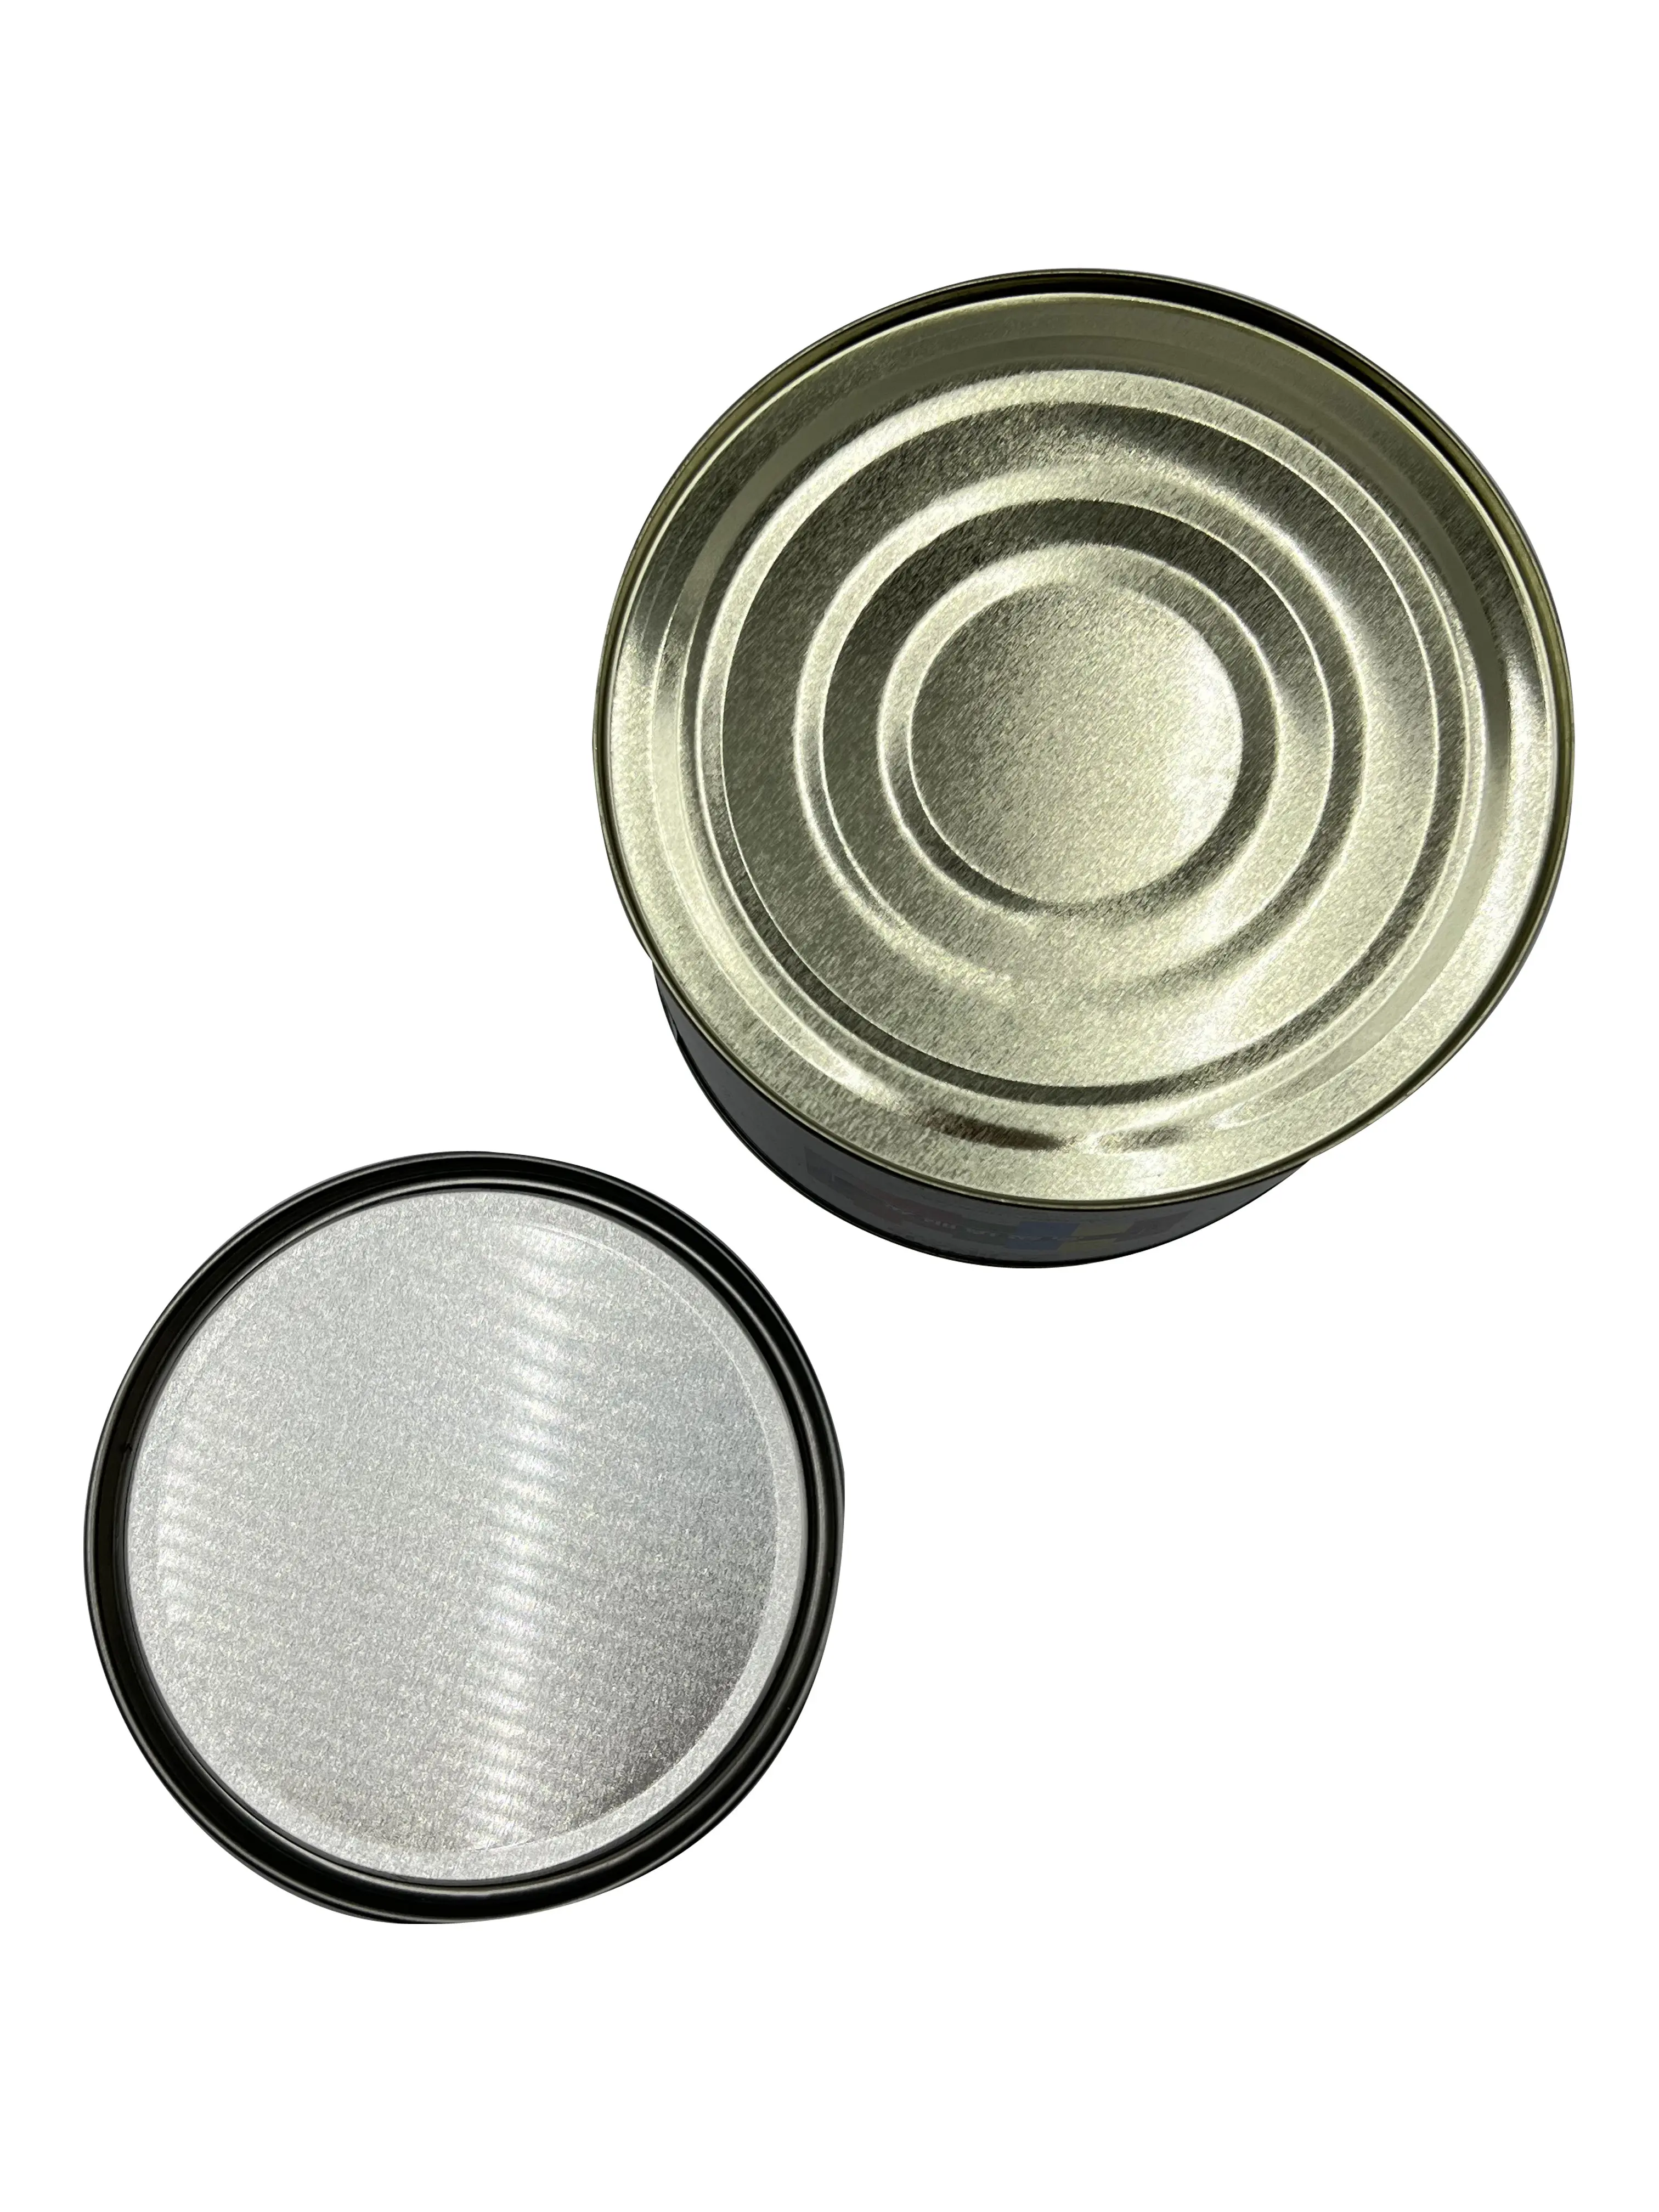 Multi functional 0.8kg cylindrical tin cans for food packaging and storage Food grade tin cans are easy to handle Open tin cans